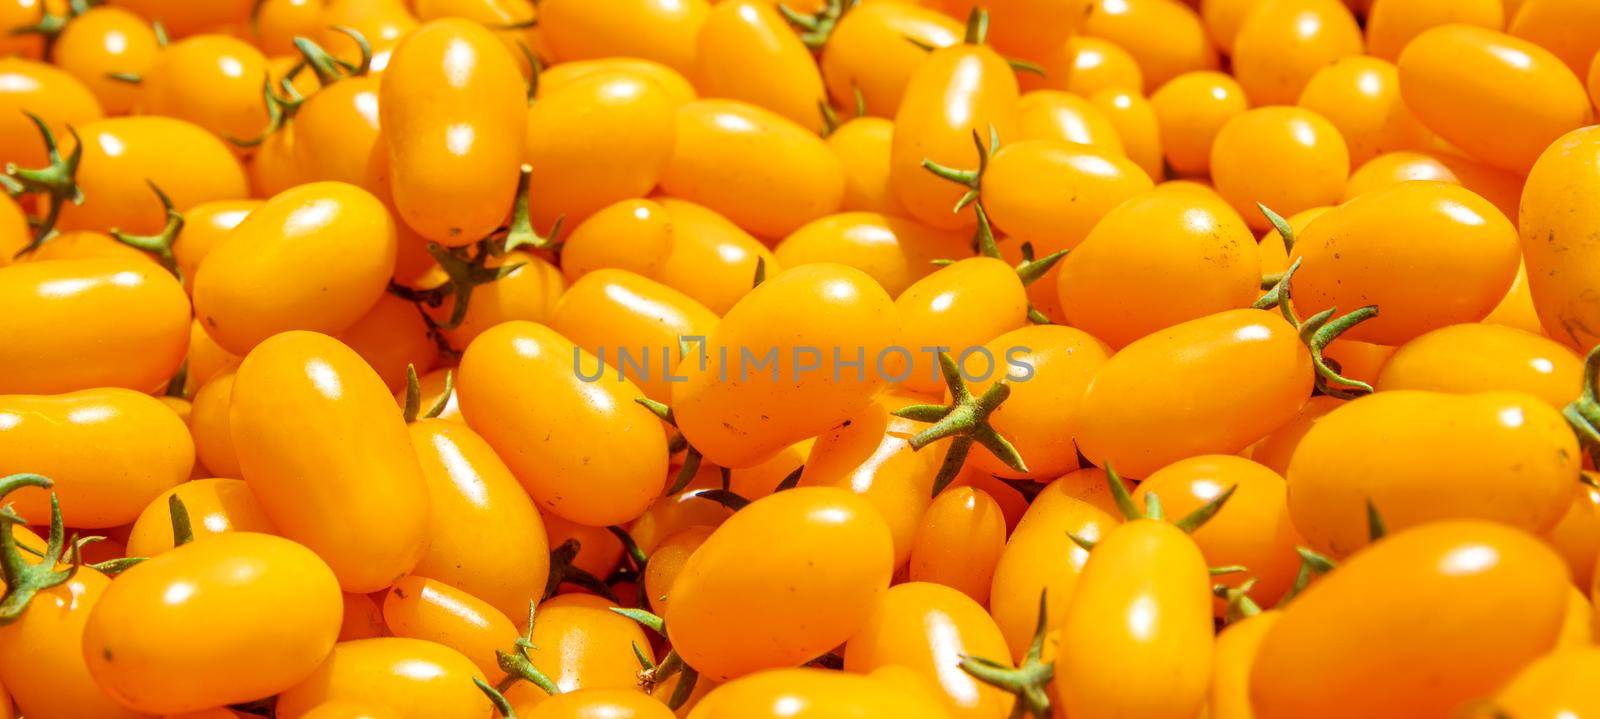 background from yellow ripe tomatoes grown without chemistry.